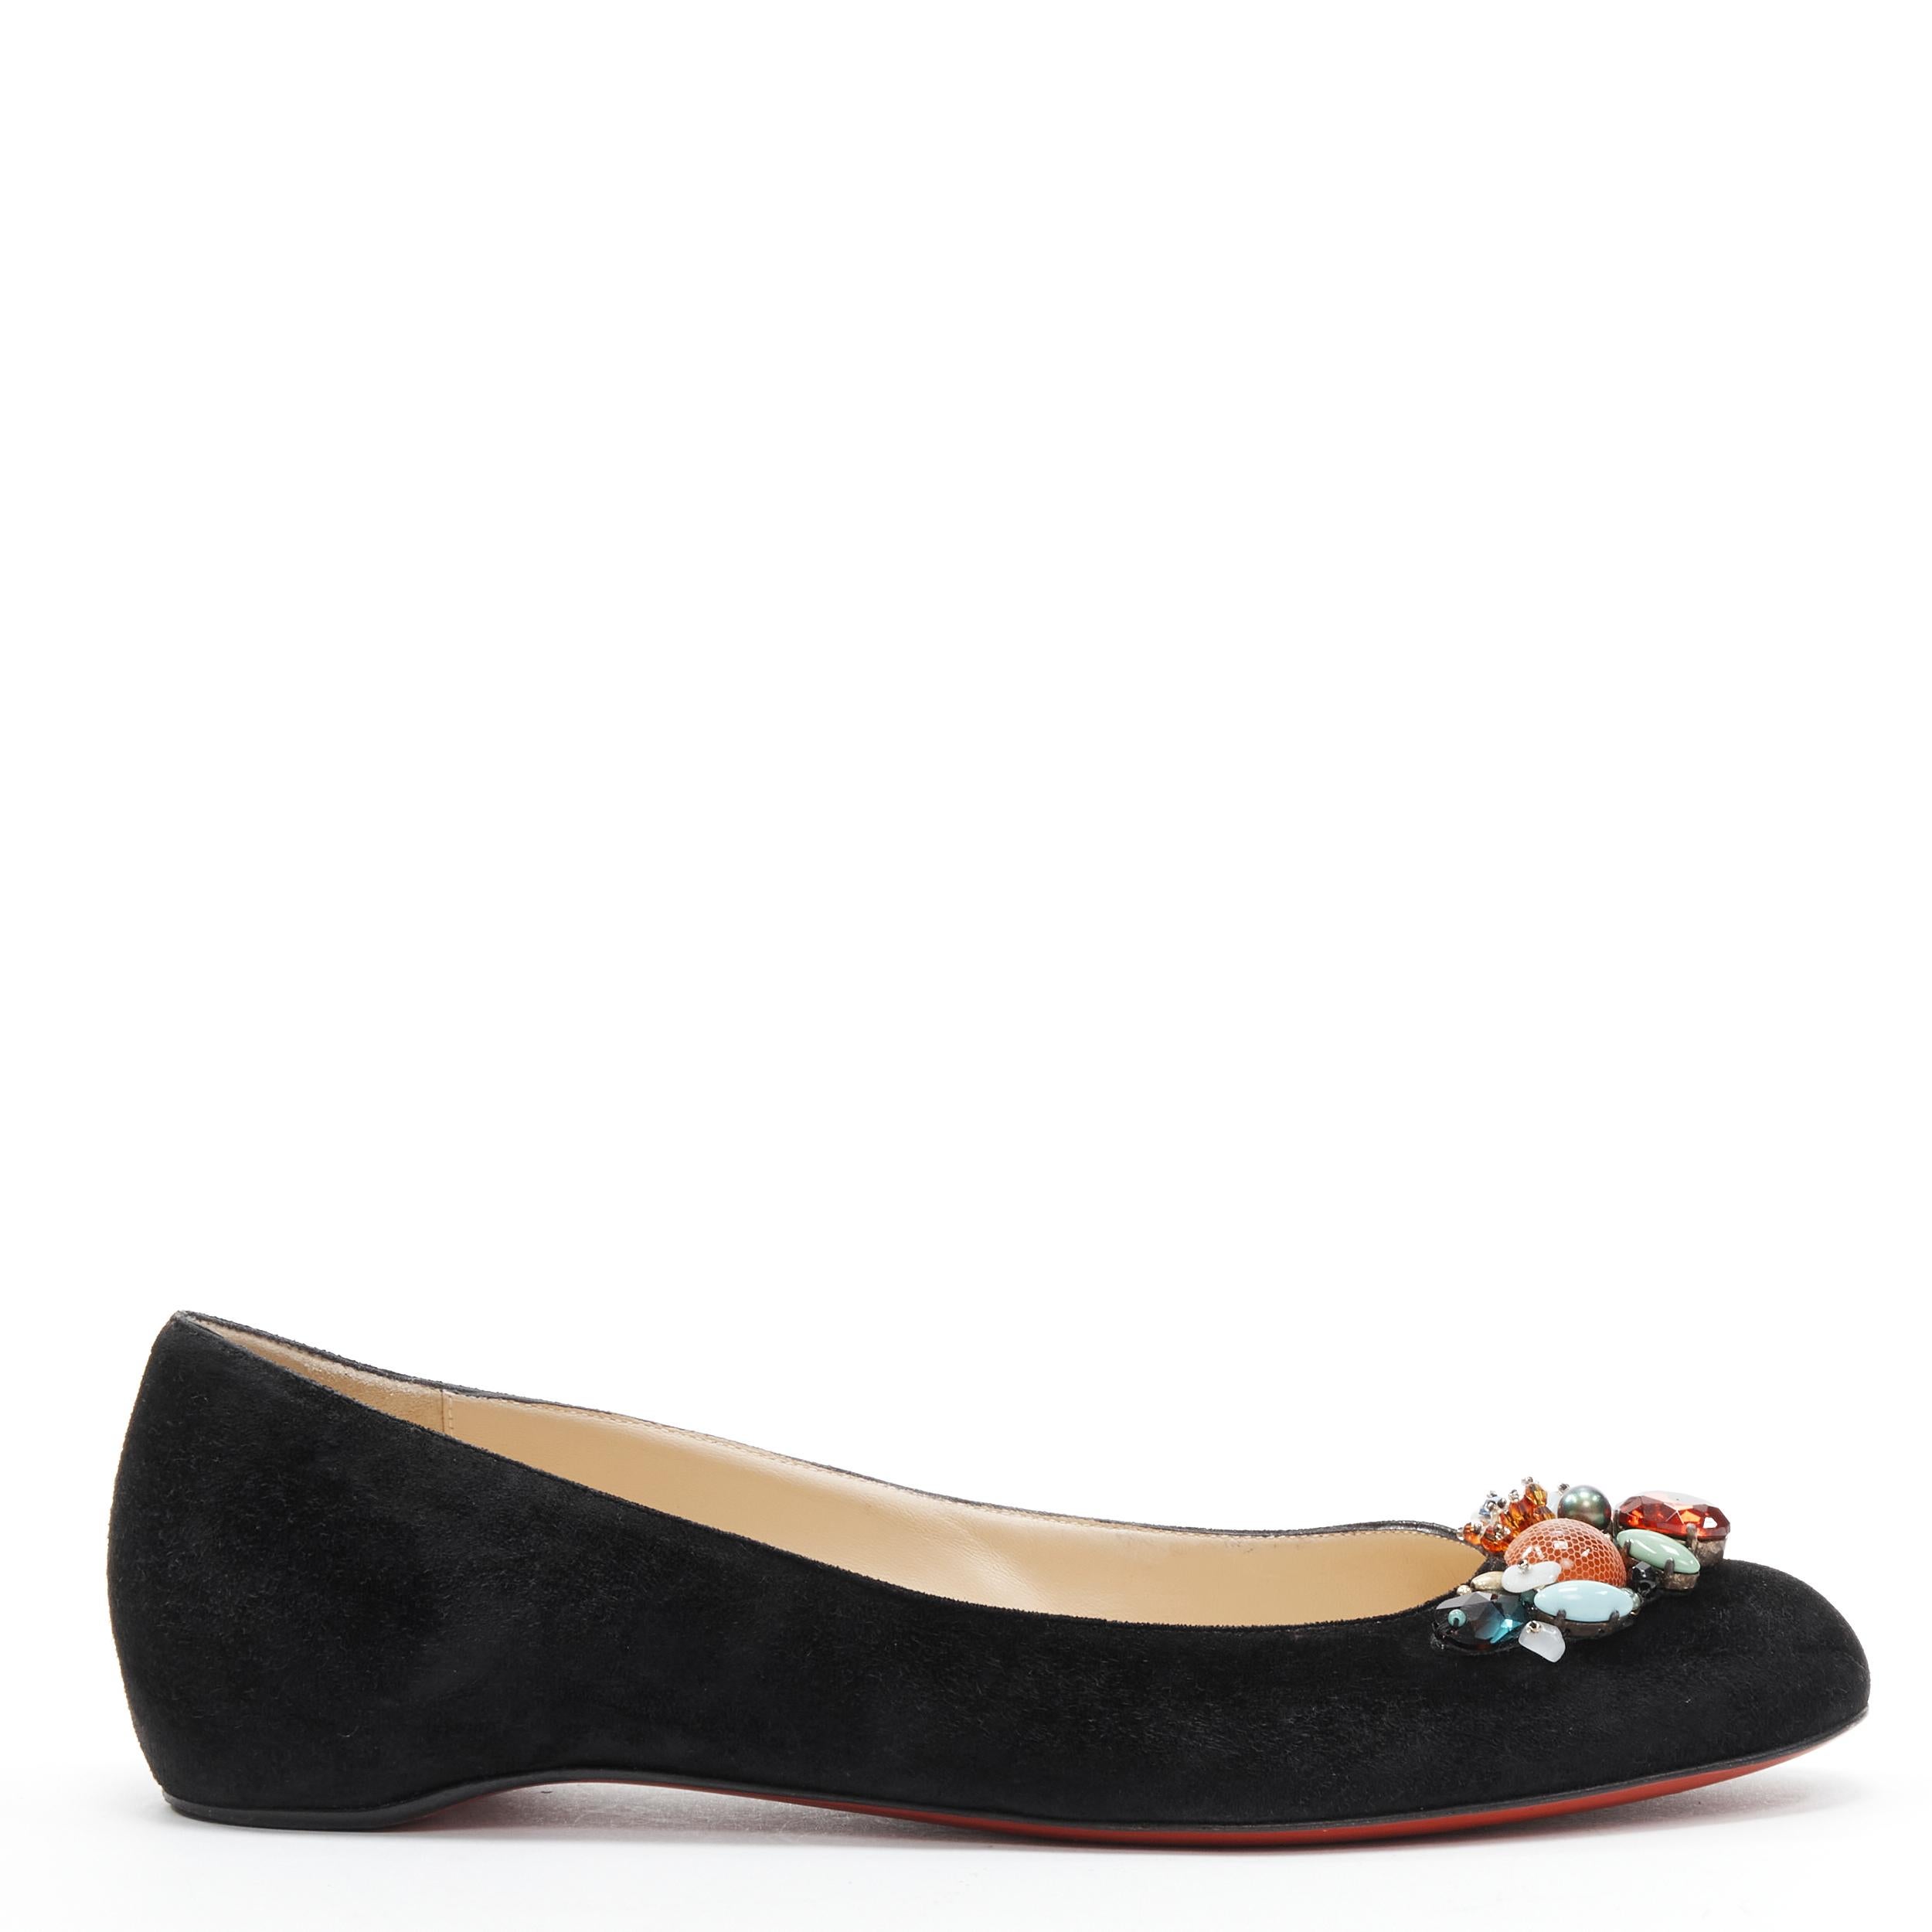 CHRISTIAN LOUBOUTIN mixed crystal stone rhinestone black suede flats EU37.5 
Reference: TGAS/B01856 
Brand: Christian Louboutin 
Designer: Christian Louboutin 
Model: Embellished suede flats 
Material: Suede 
Color: Black 
Pattern: Solid 
Made in: